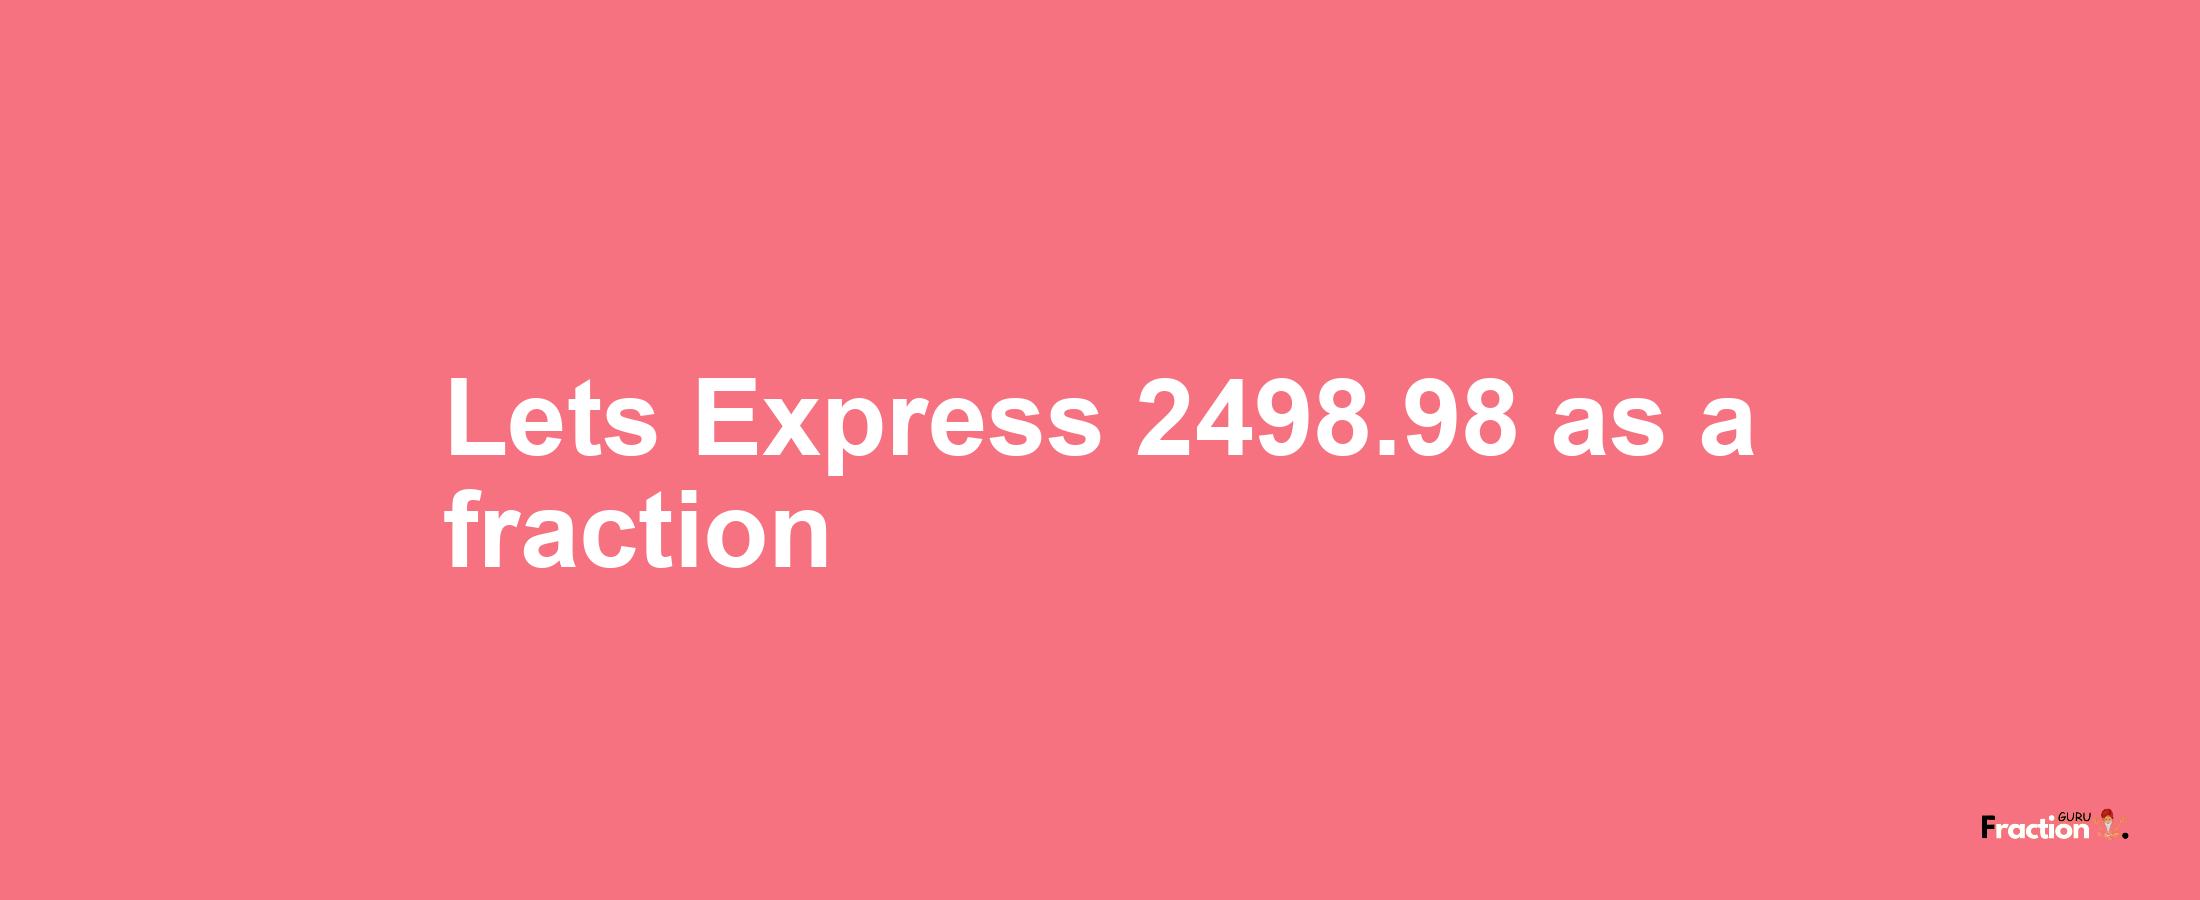 Lets Express 2498.98 as afraction